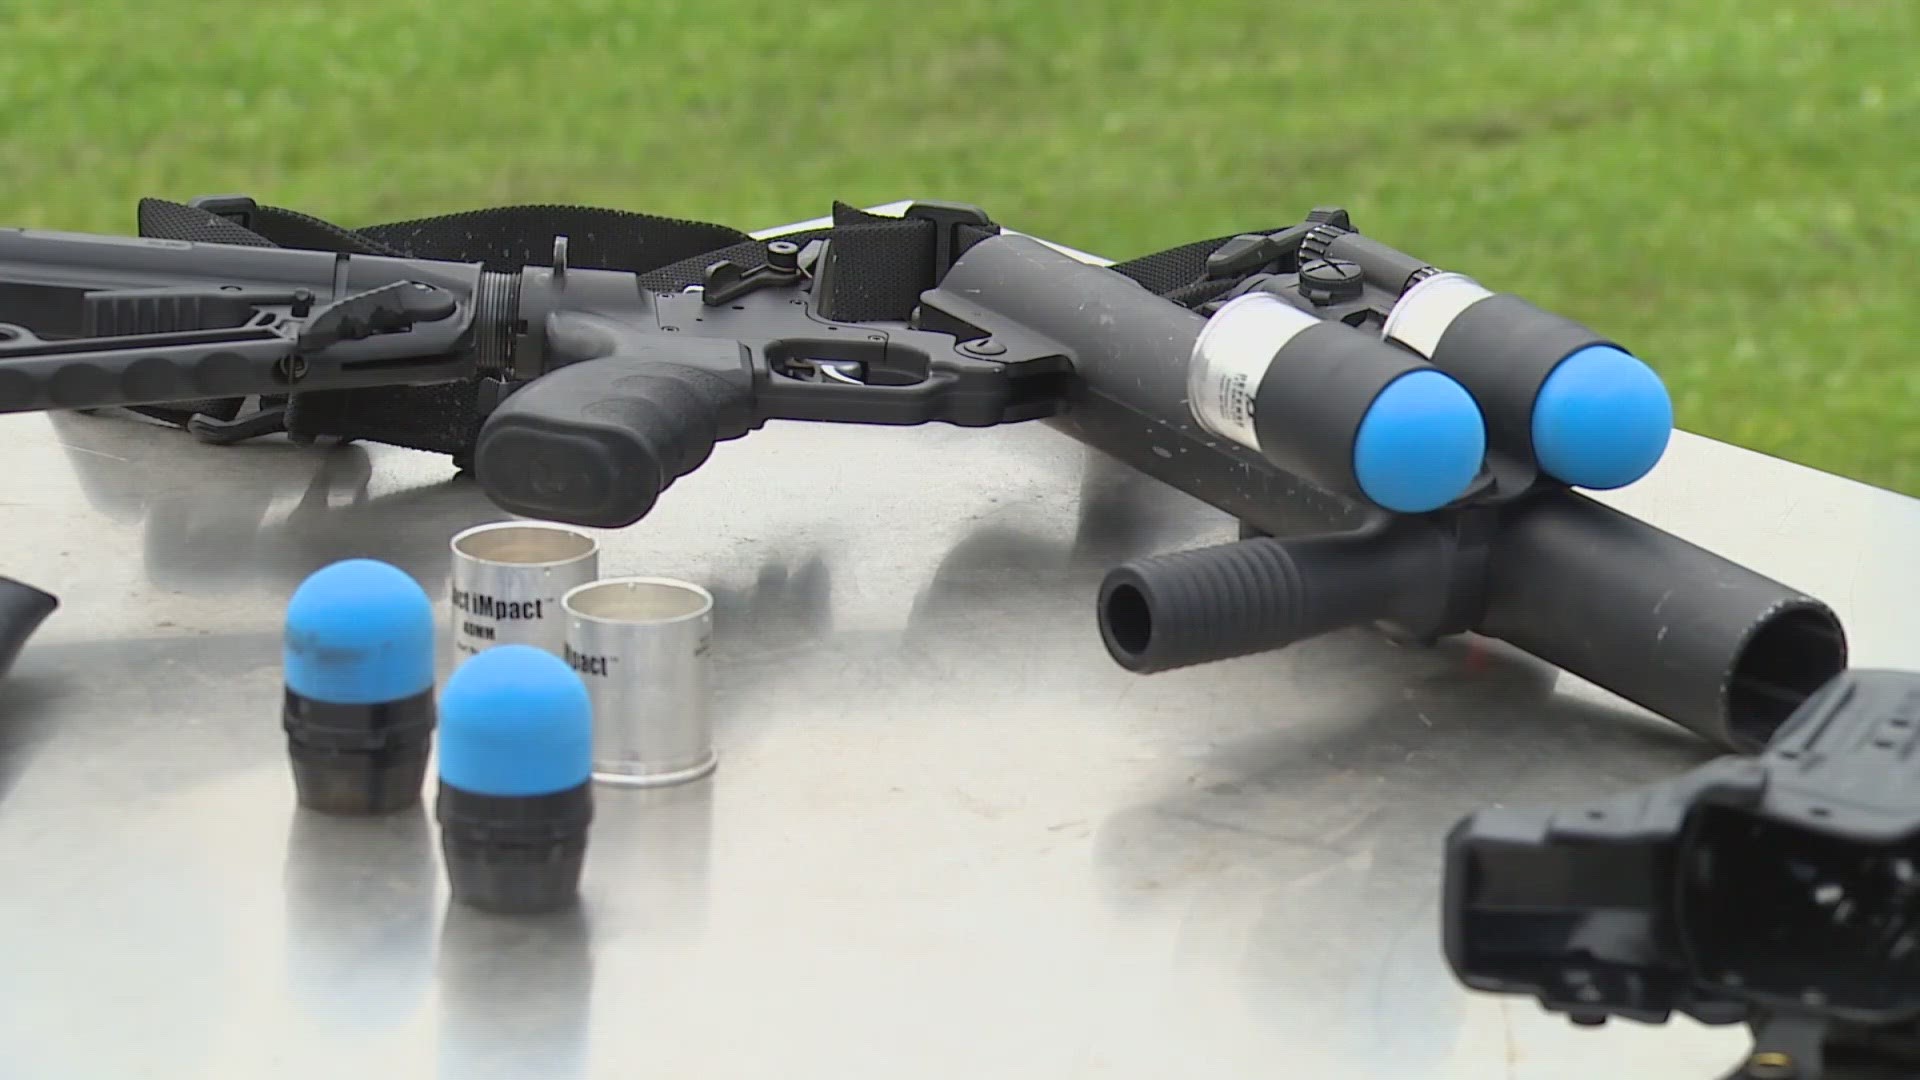 The "less lethal" weapons give officers more options that don't involve deadly force.